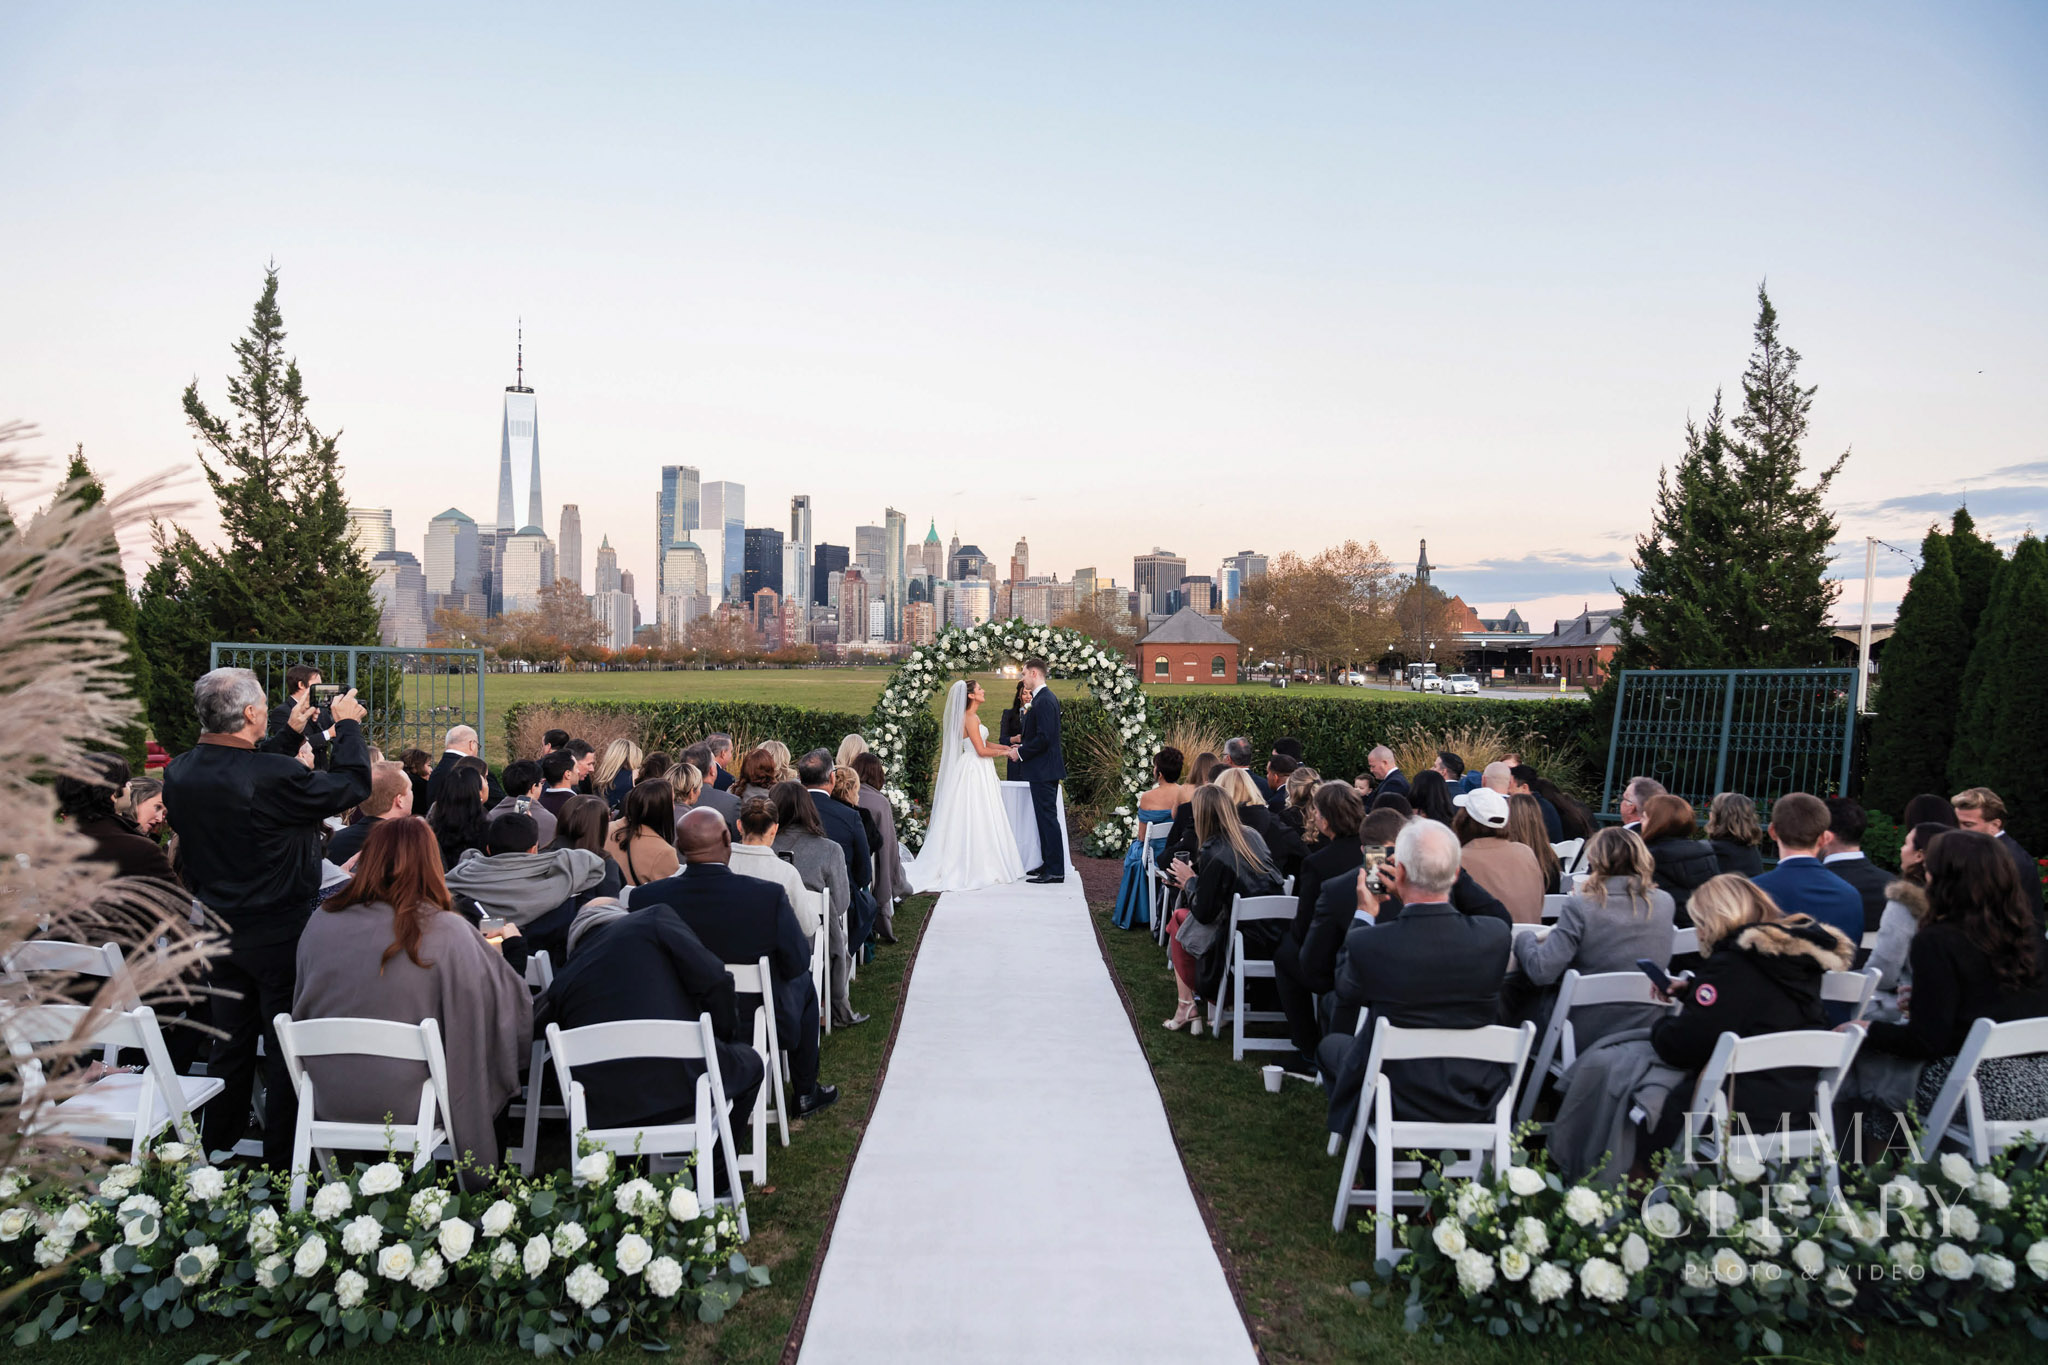 Wedding ceremony at the Liberty house